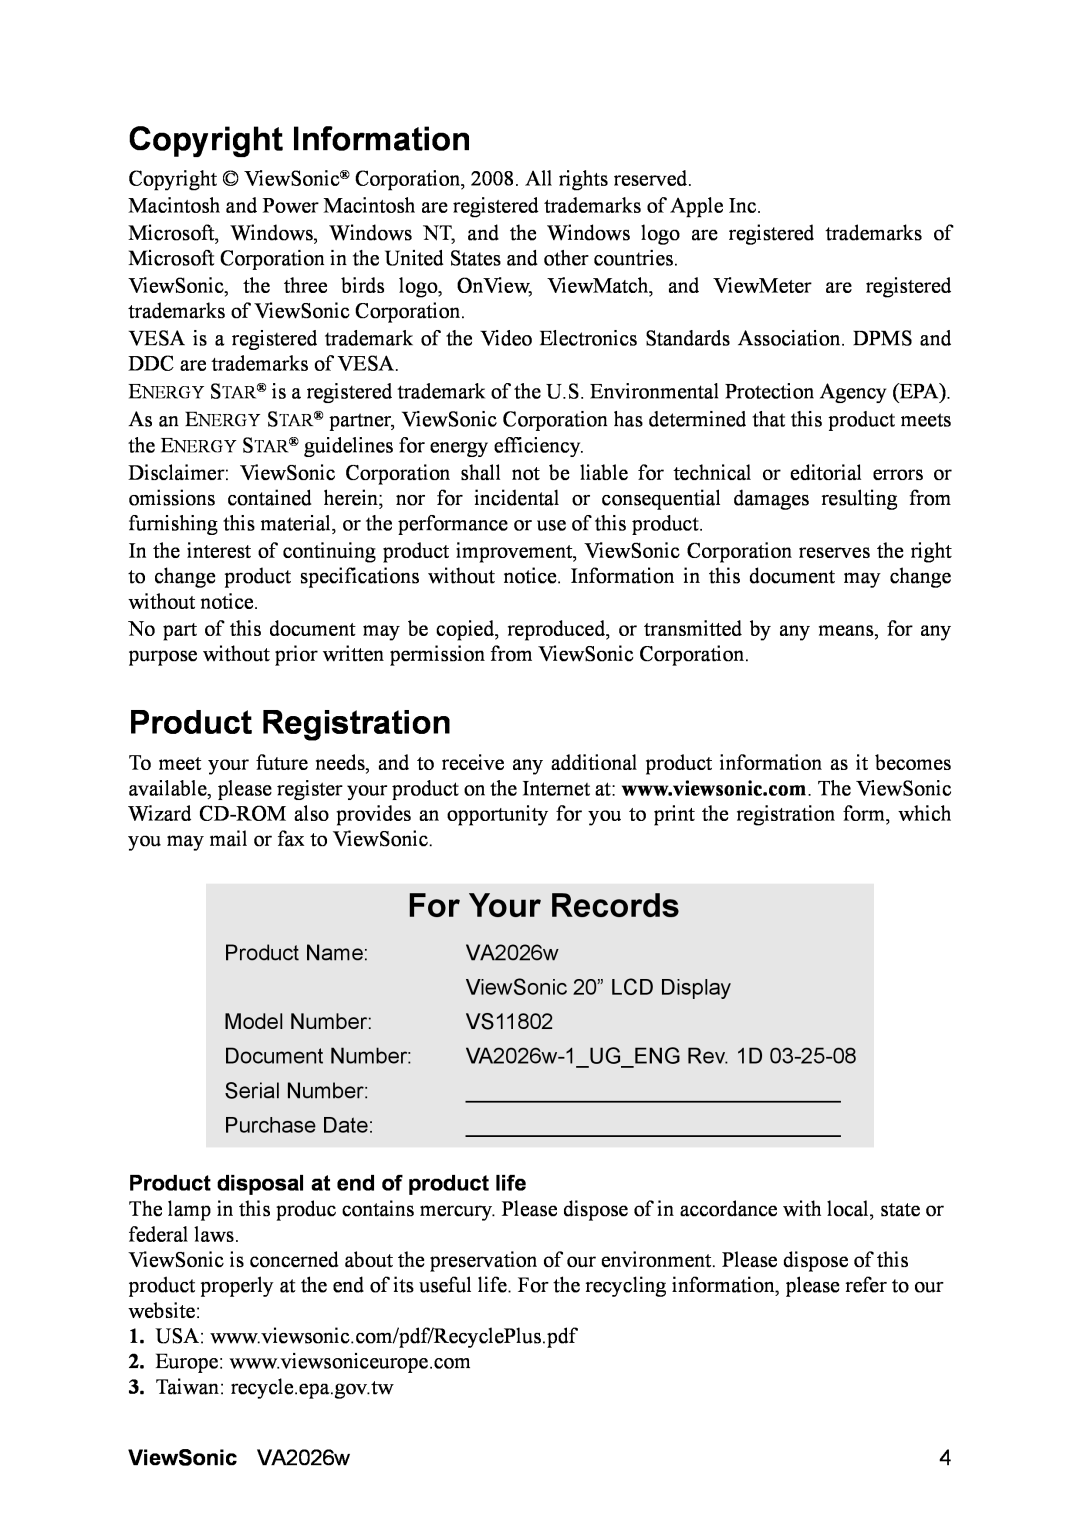 ViewSonic VS11802 Copyright Information, Product Registration, For Your Records, Product disposal at end of product life 